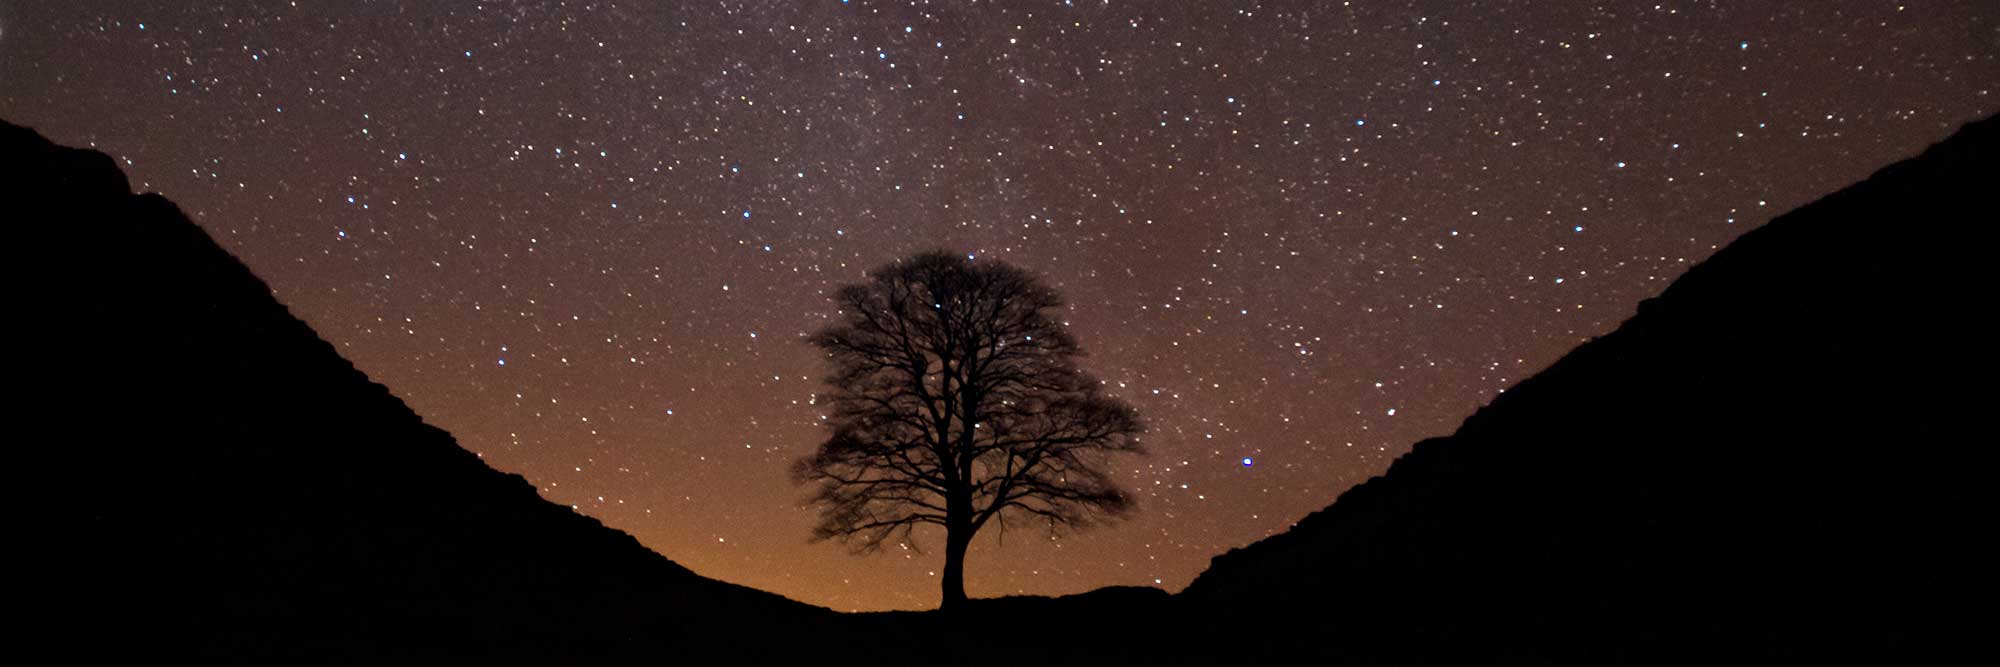 A tree silhouetted against a starry sky